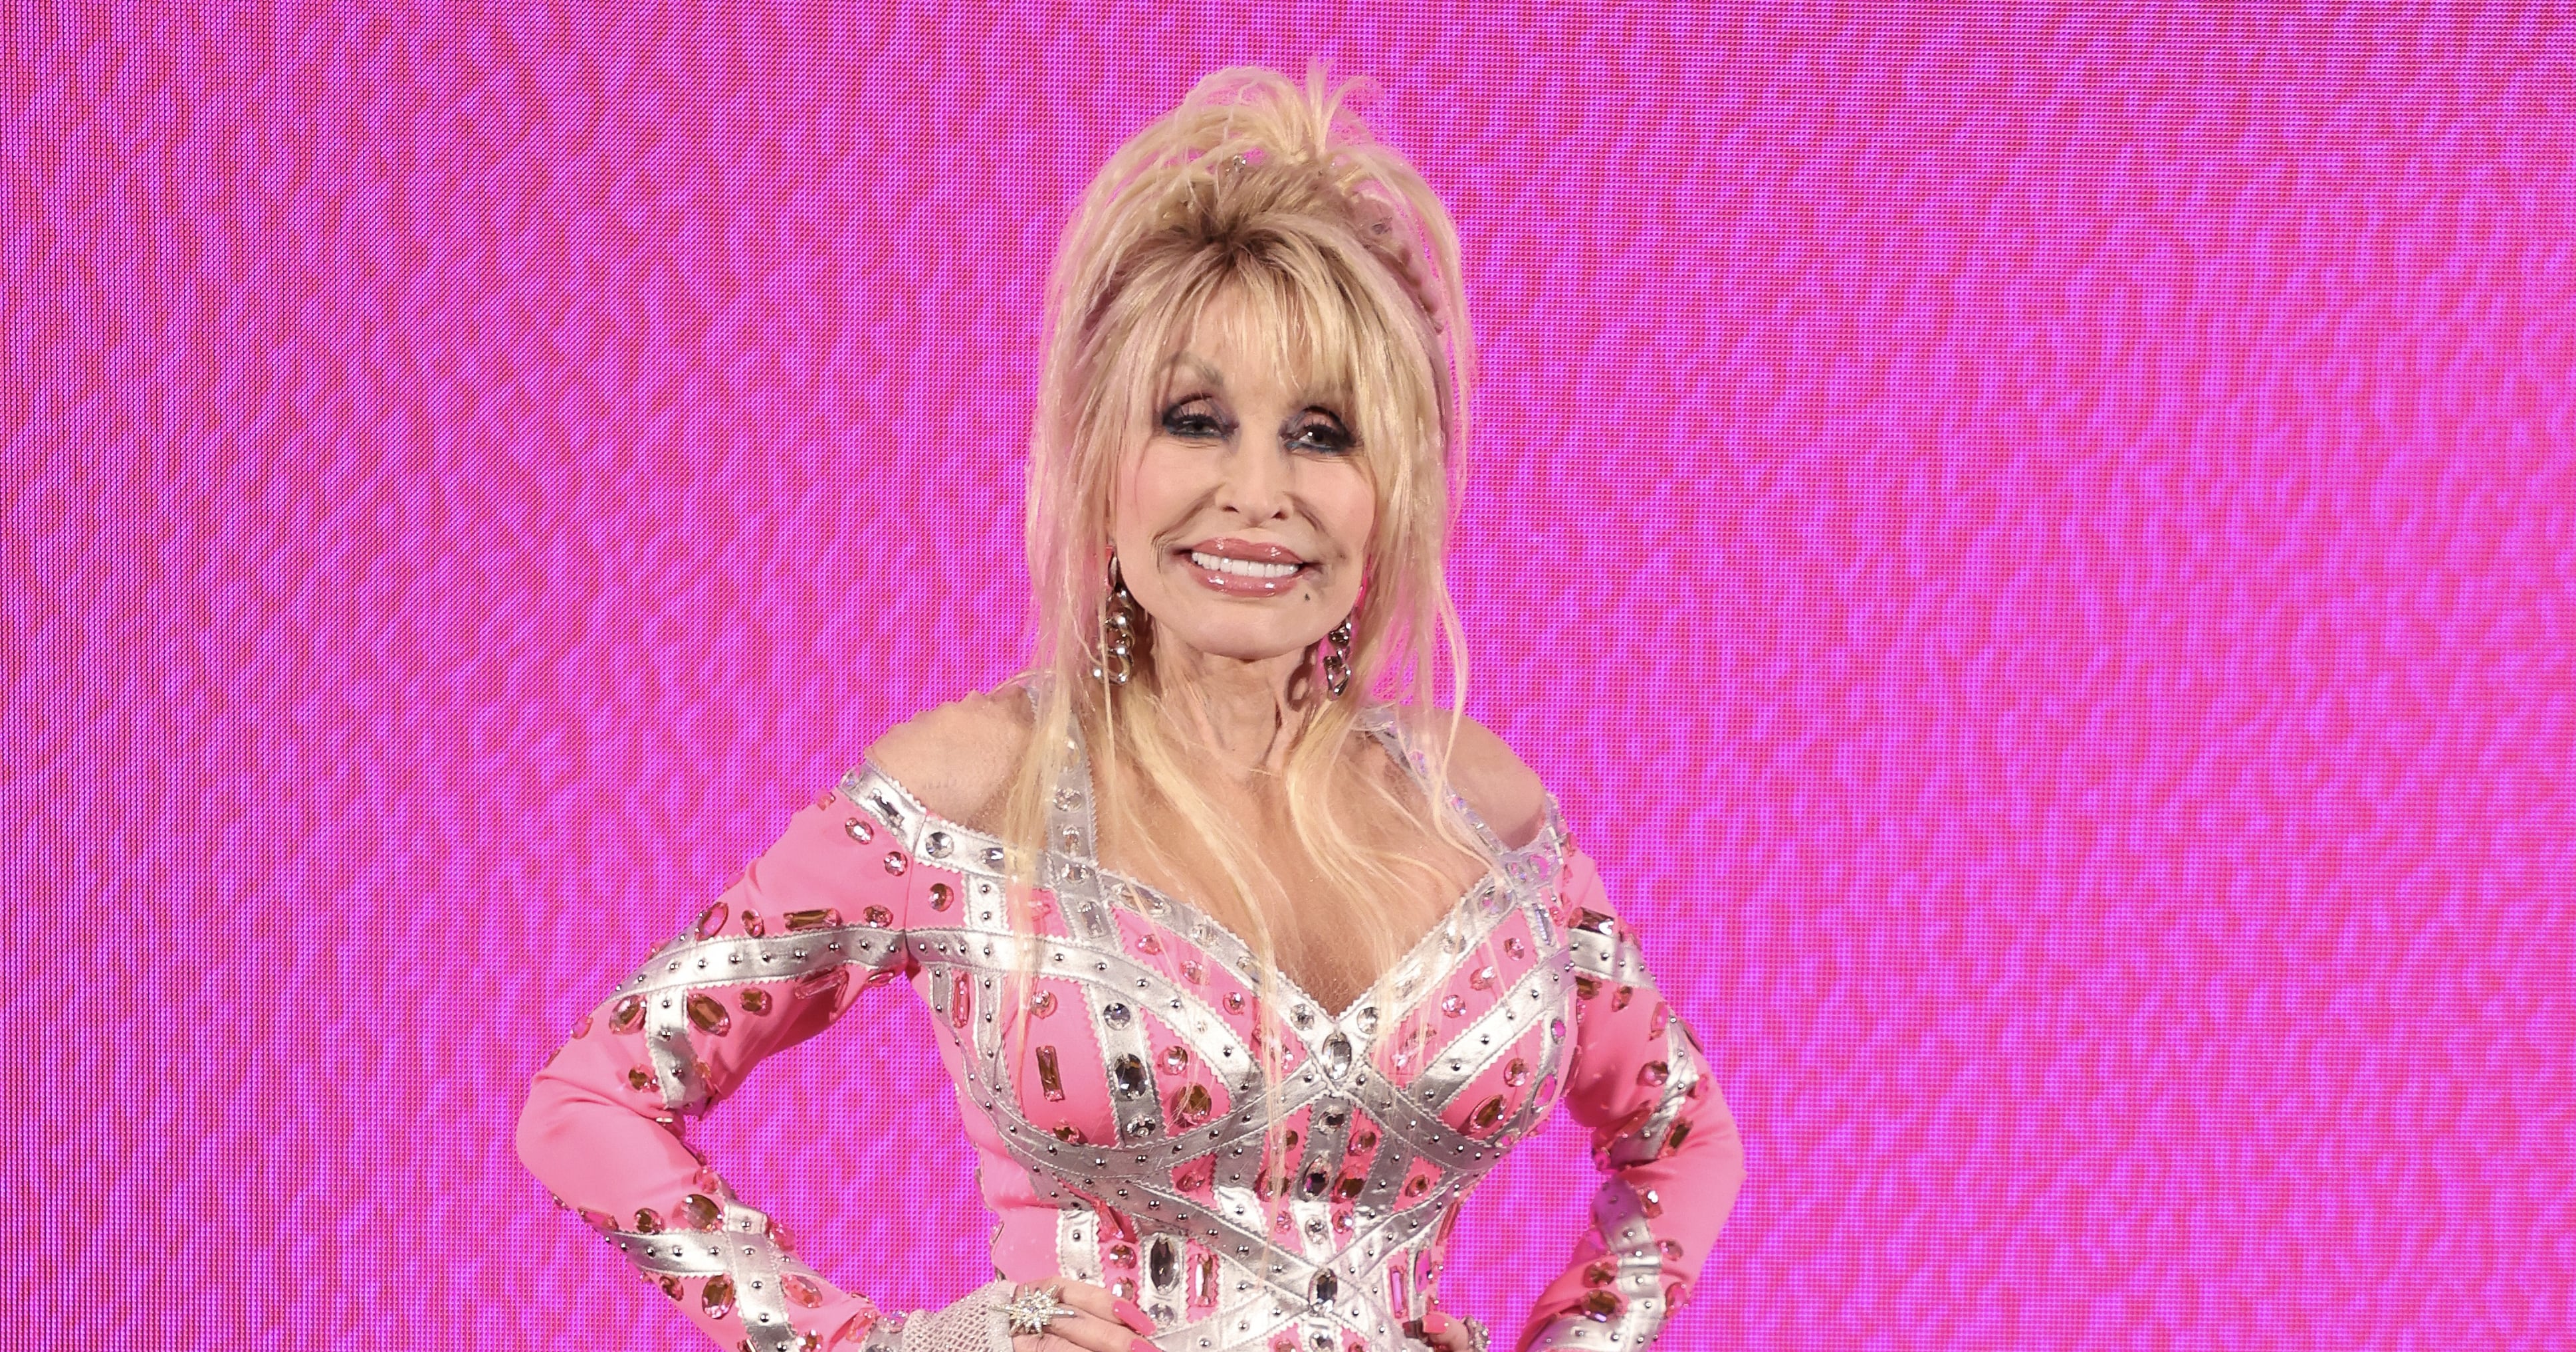 The Mysterious Case of Dolly Parton’s Tattoo Collection